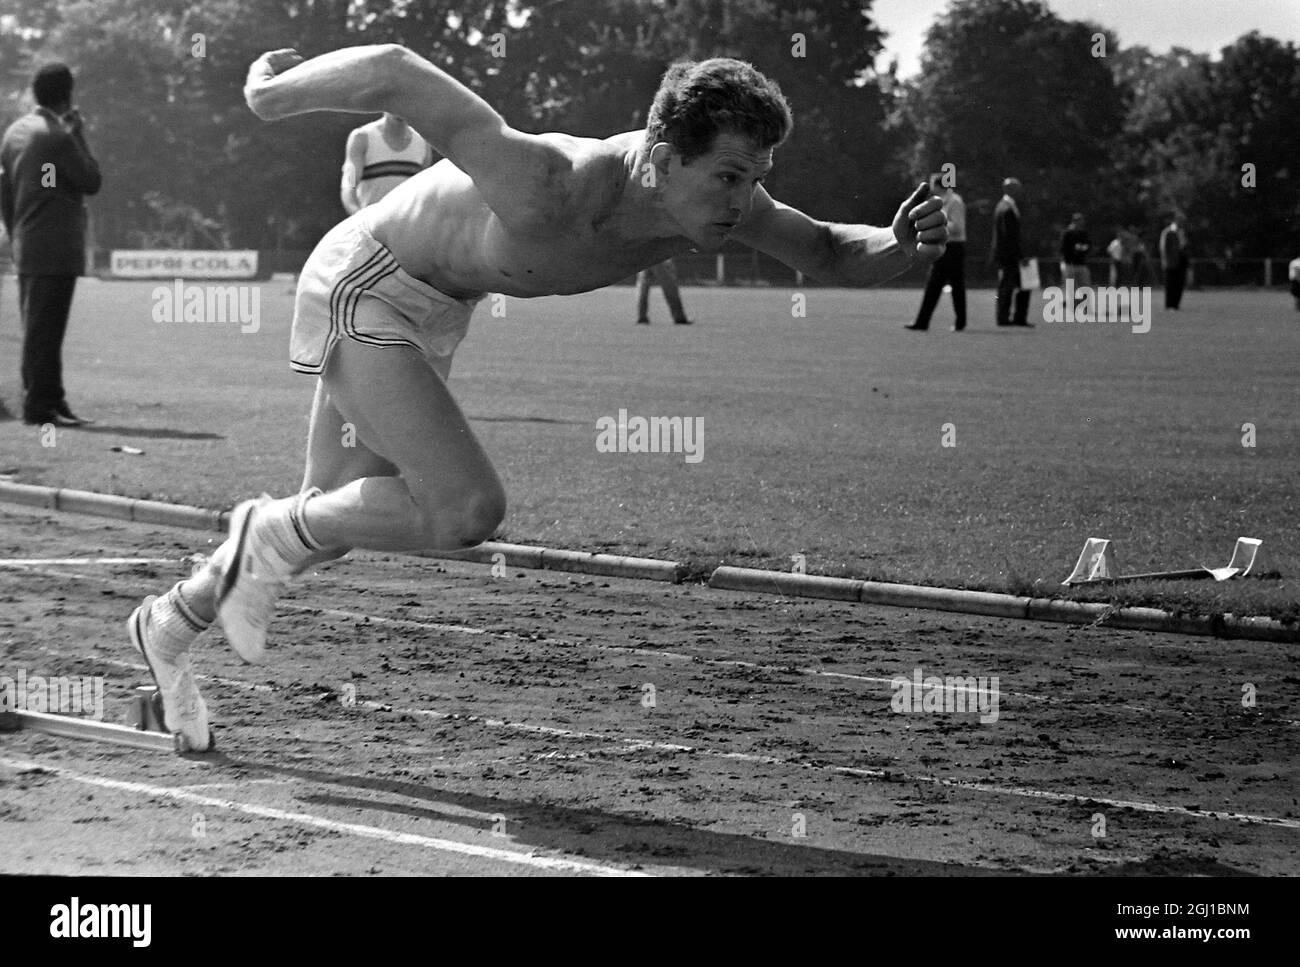 BOBBY BRIGHTWELL R ATHLET / ; 30. AUGUST 1964 Stockfoto